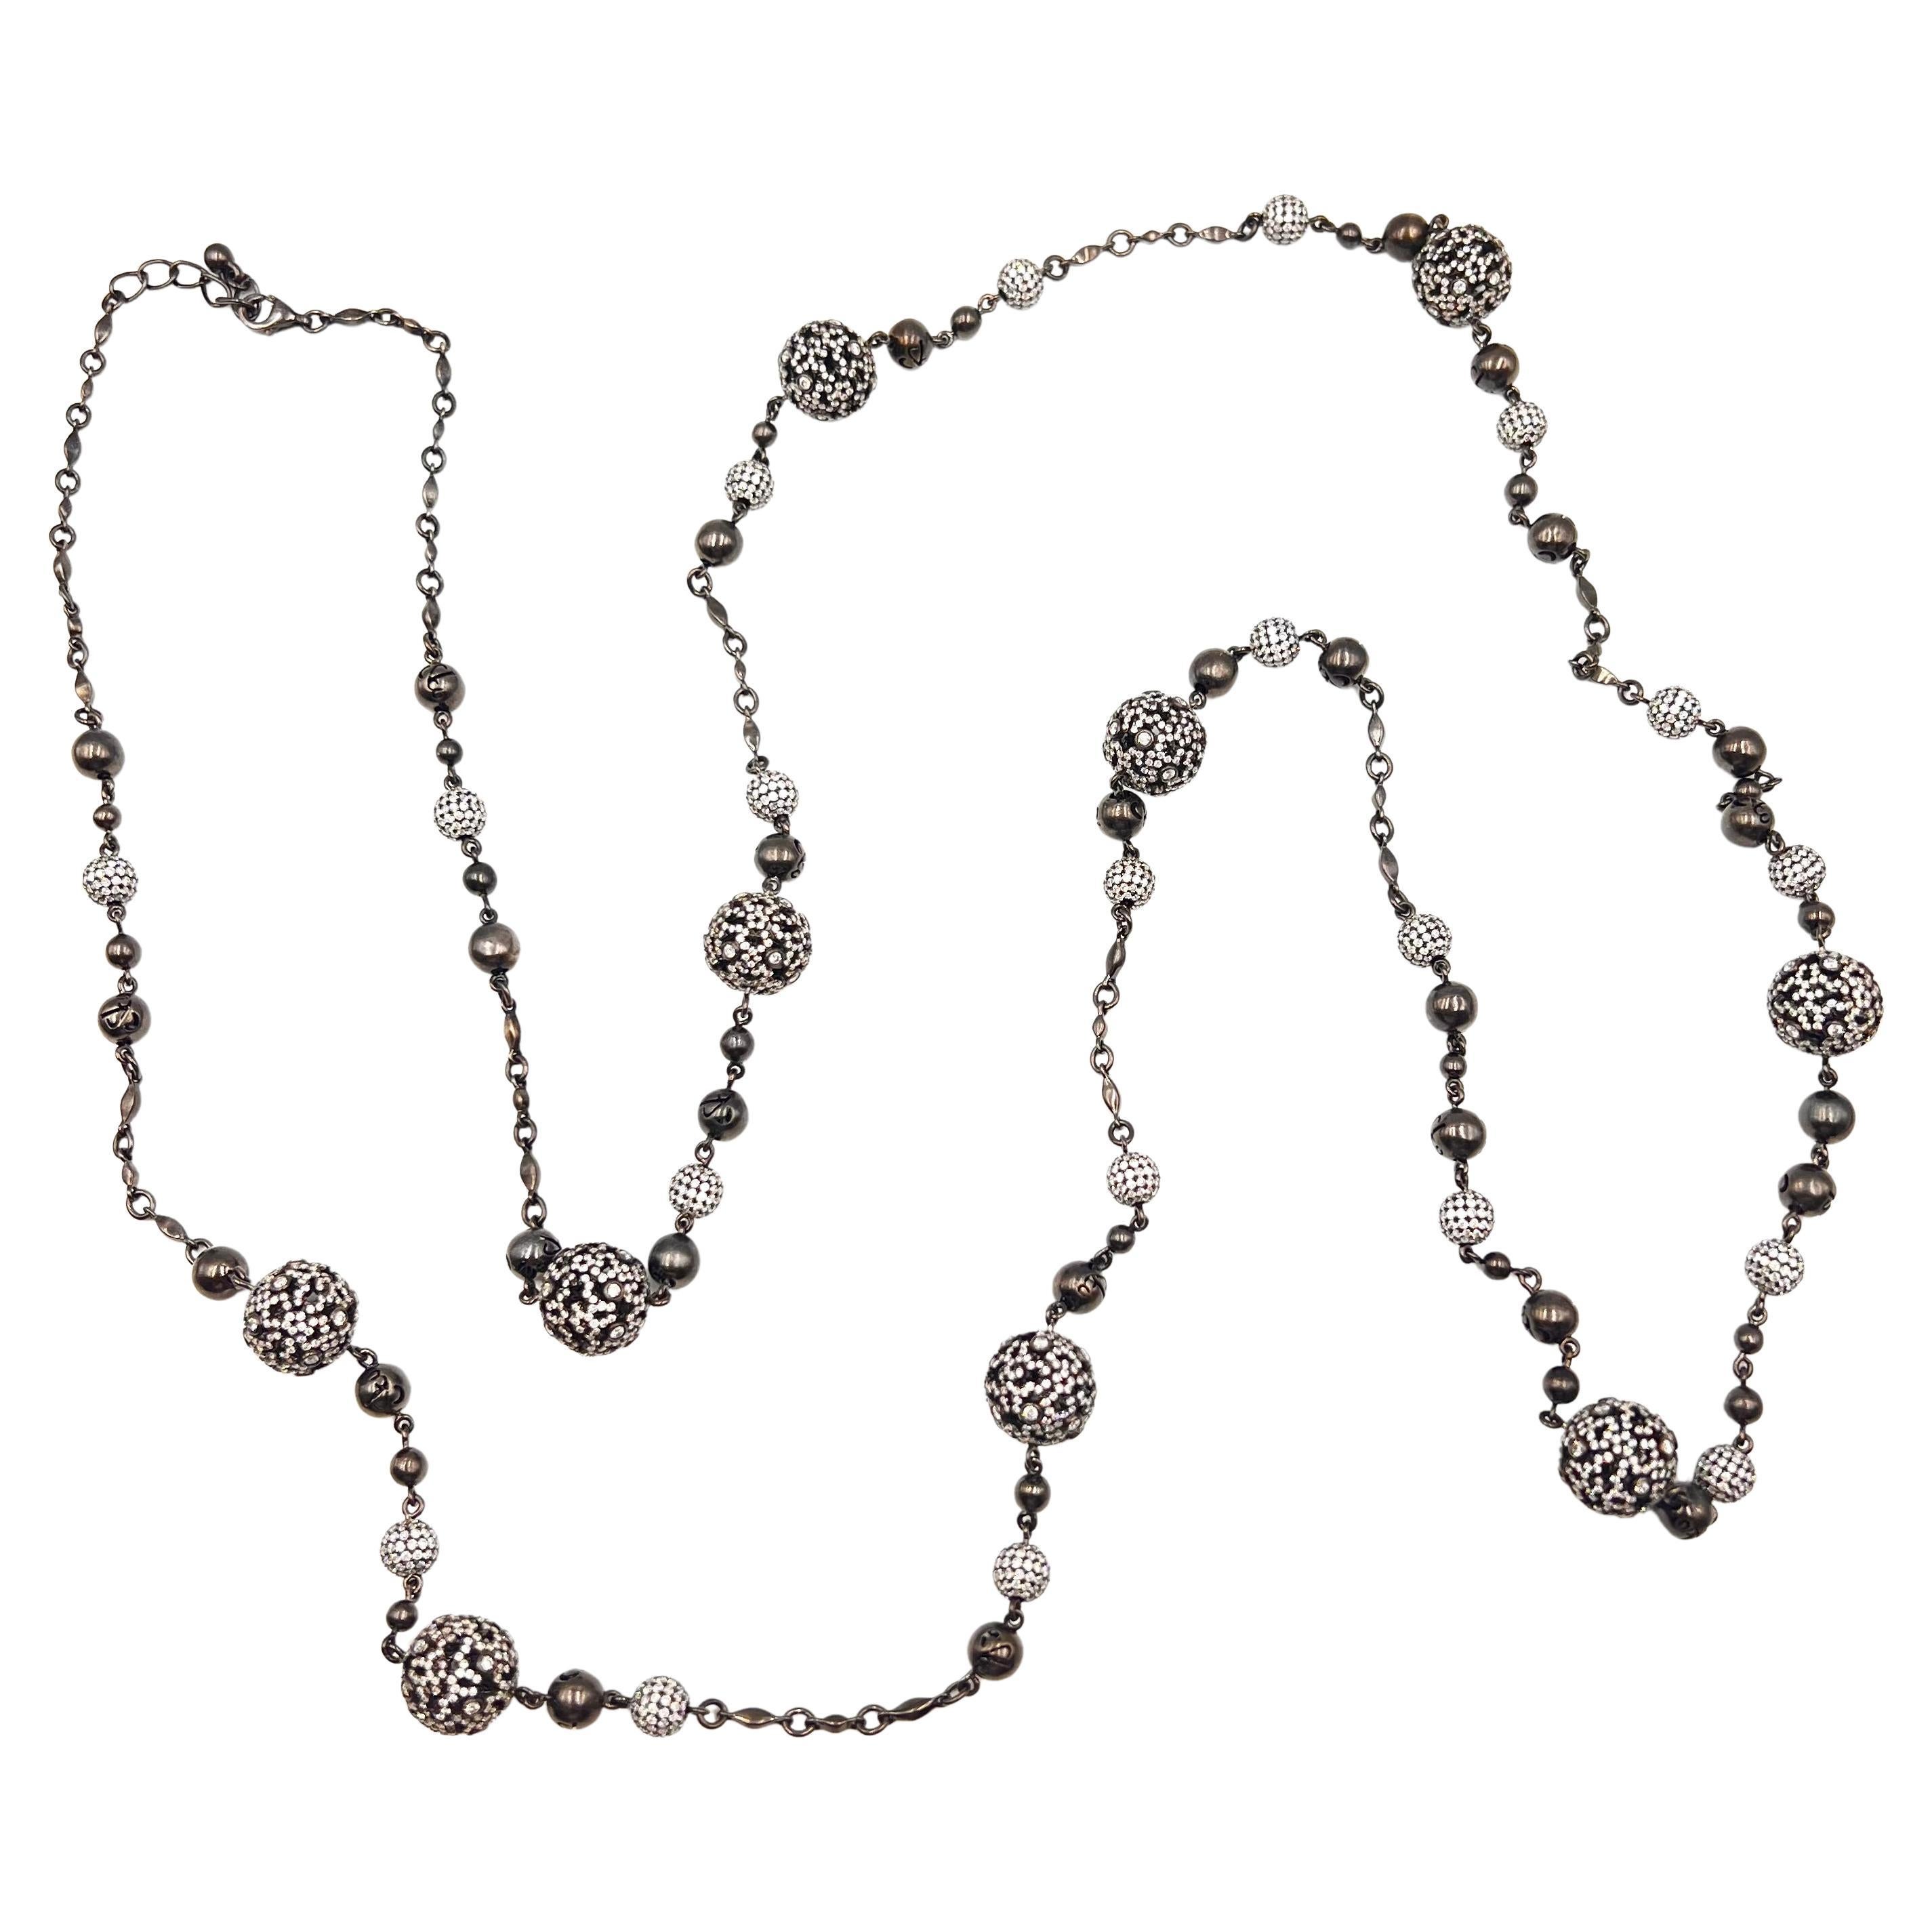 Jacob & Co. Lace Collection ball long necklace crafted in 18k gold with black polished finish and pave-set with round brilliant-cut diamonds creating a stunning yet subtle effect.  Ten larger pierced, cut-out 12mm ball form beads and twenty smaller